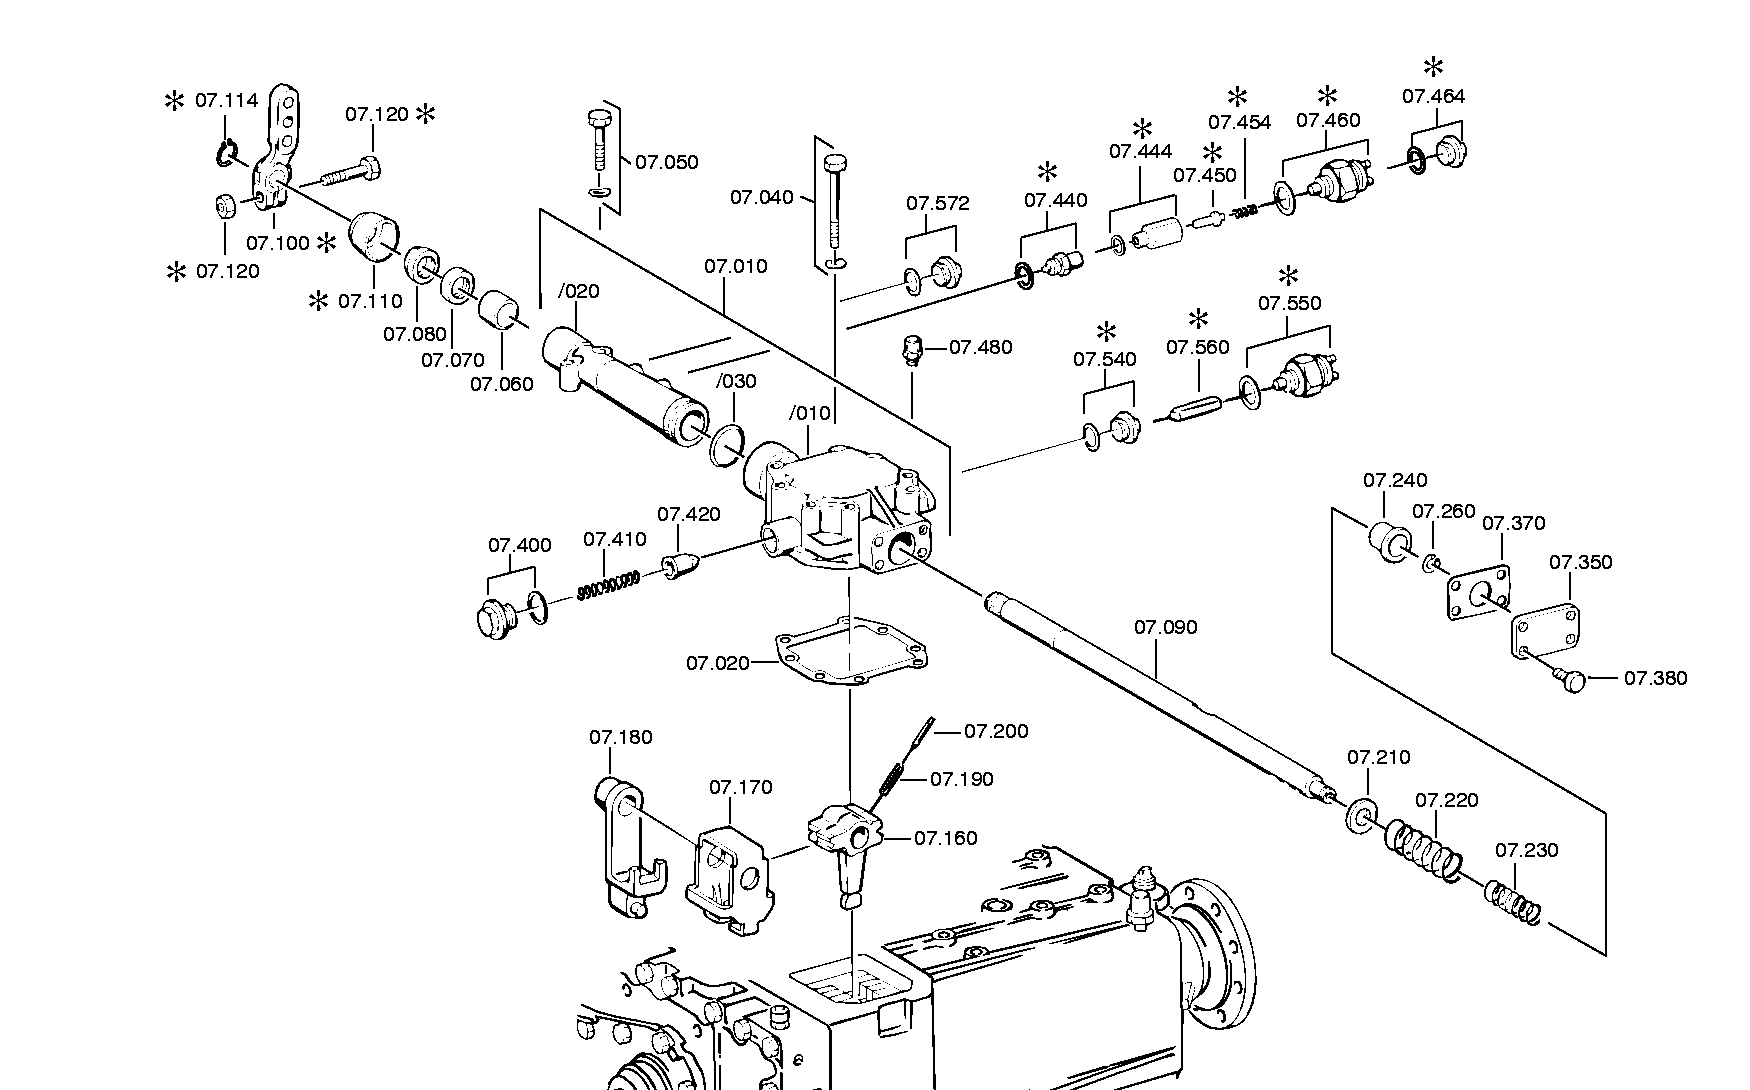 drawing for IVECO 5000822575 - DRIVER (figure 4)